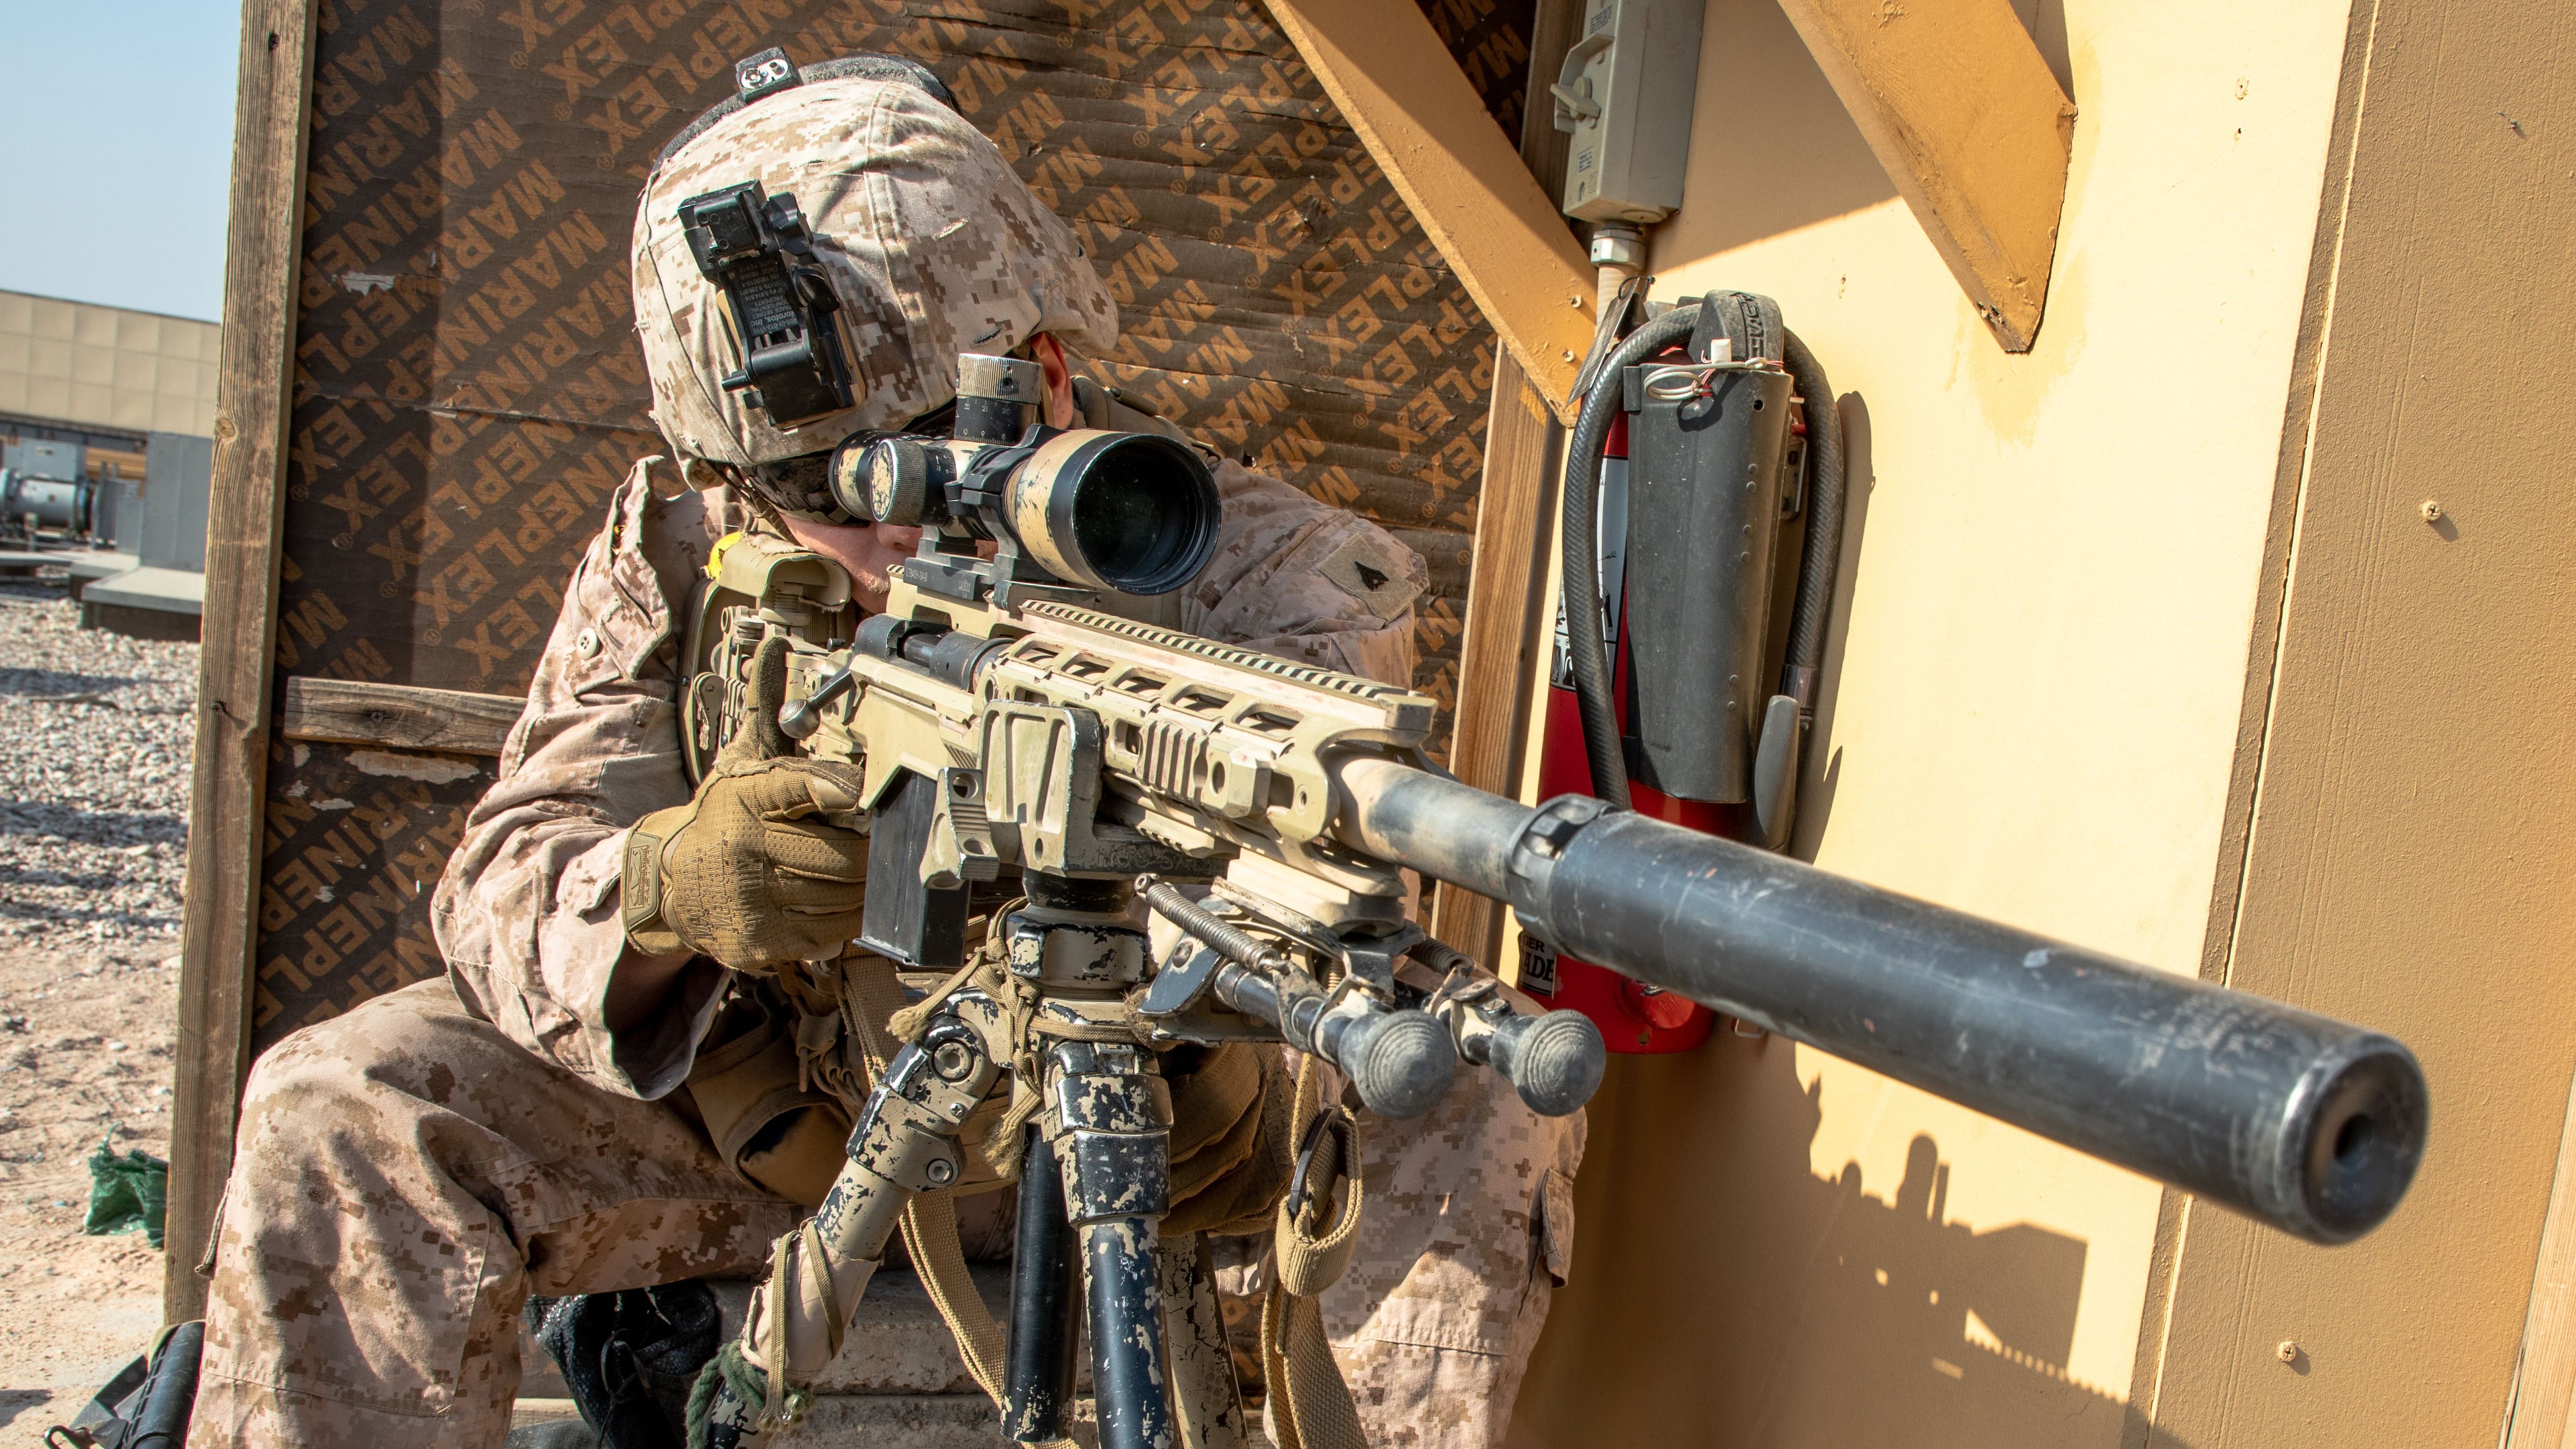 Army Awards $50 Million Contract for New Special Operations Sniper Rifle